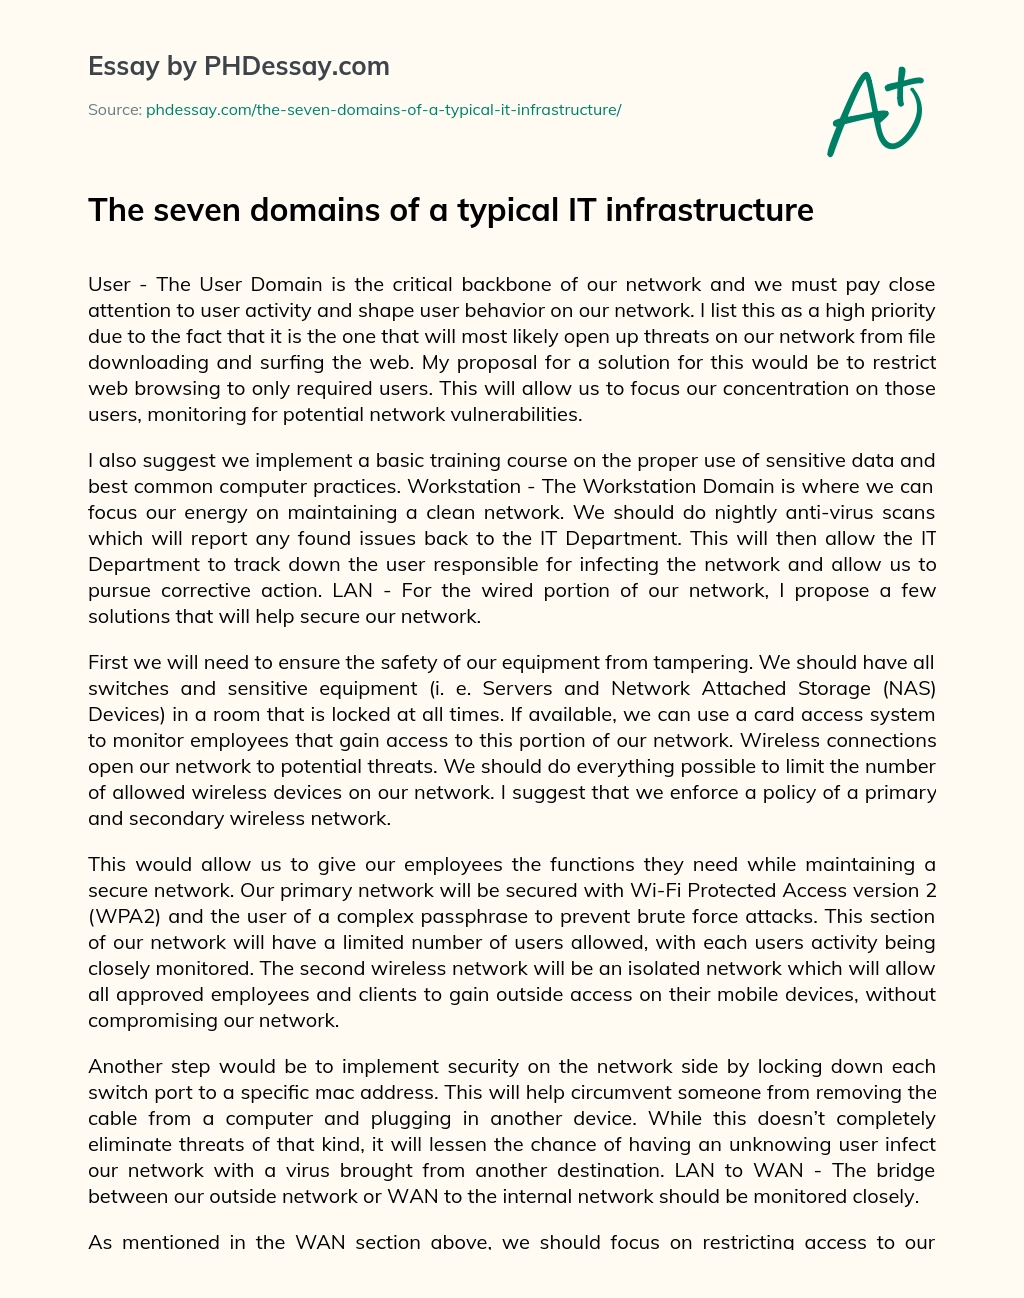 The seven domains of a typical IT infrastructure essay